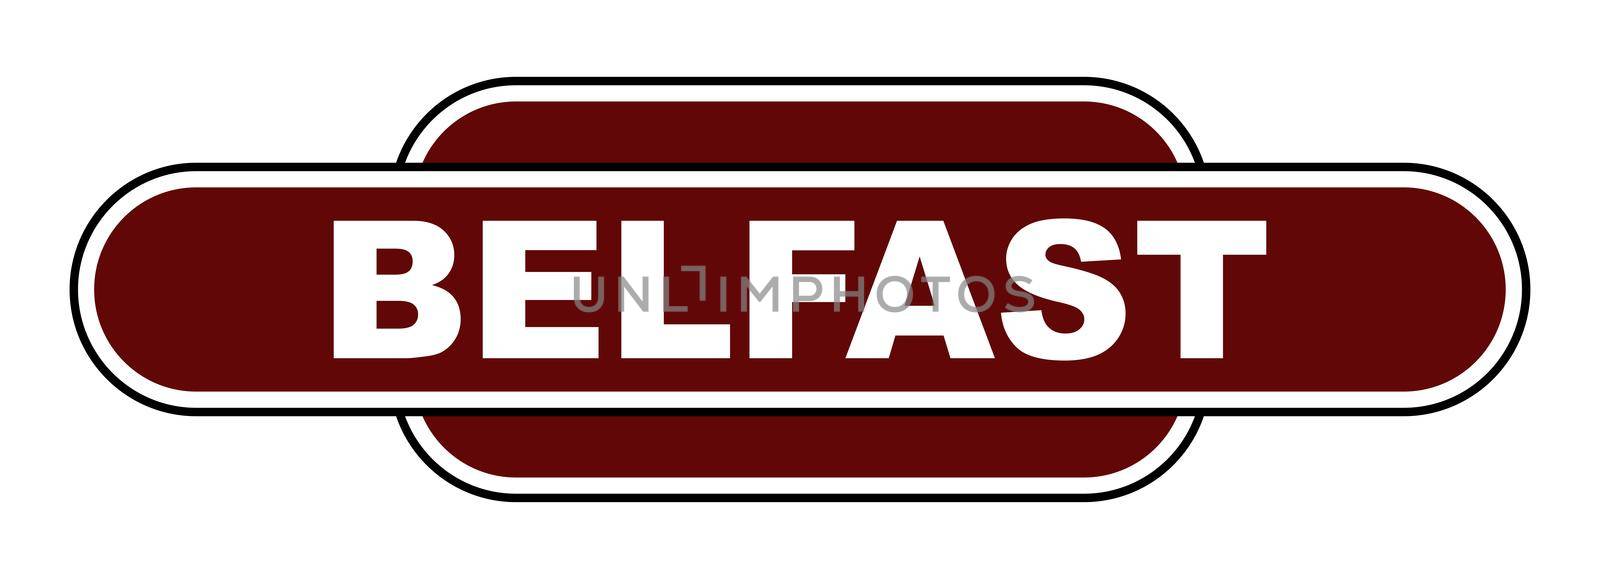 A BELFAST UK station name plate over a white background